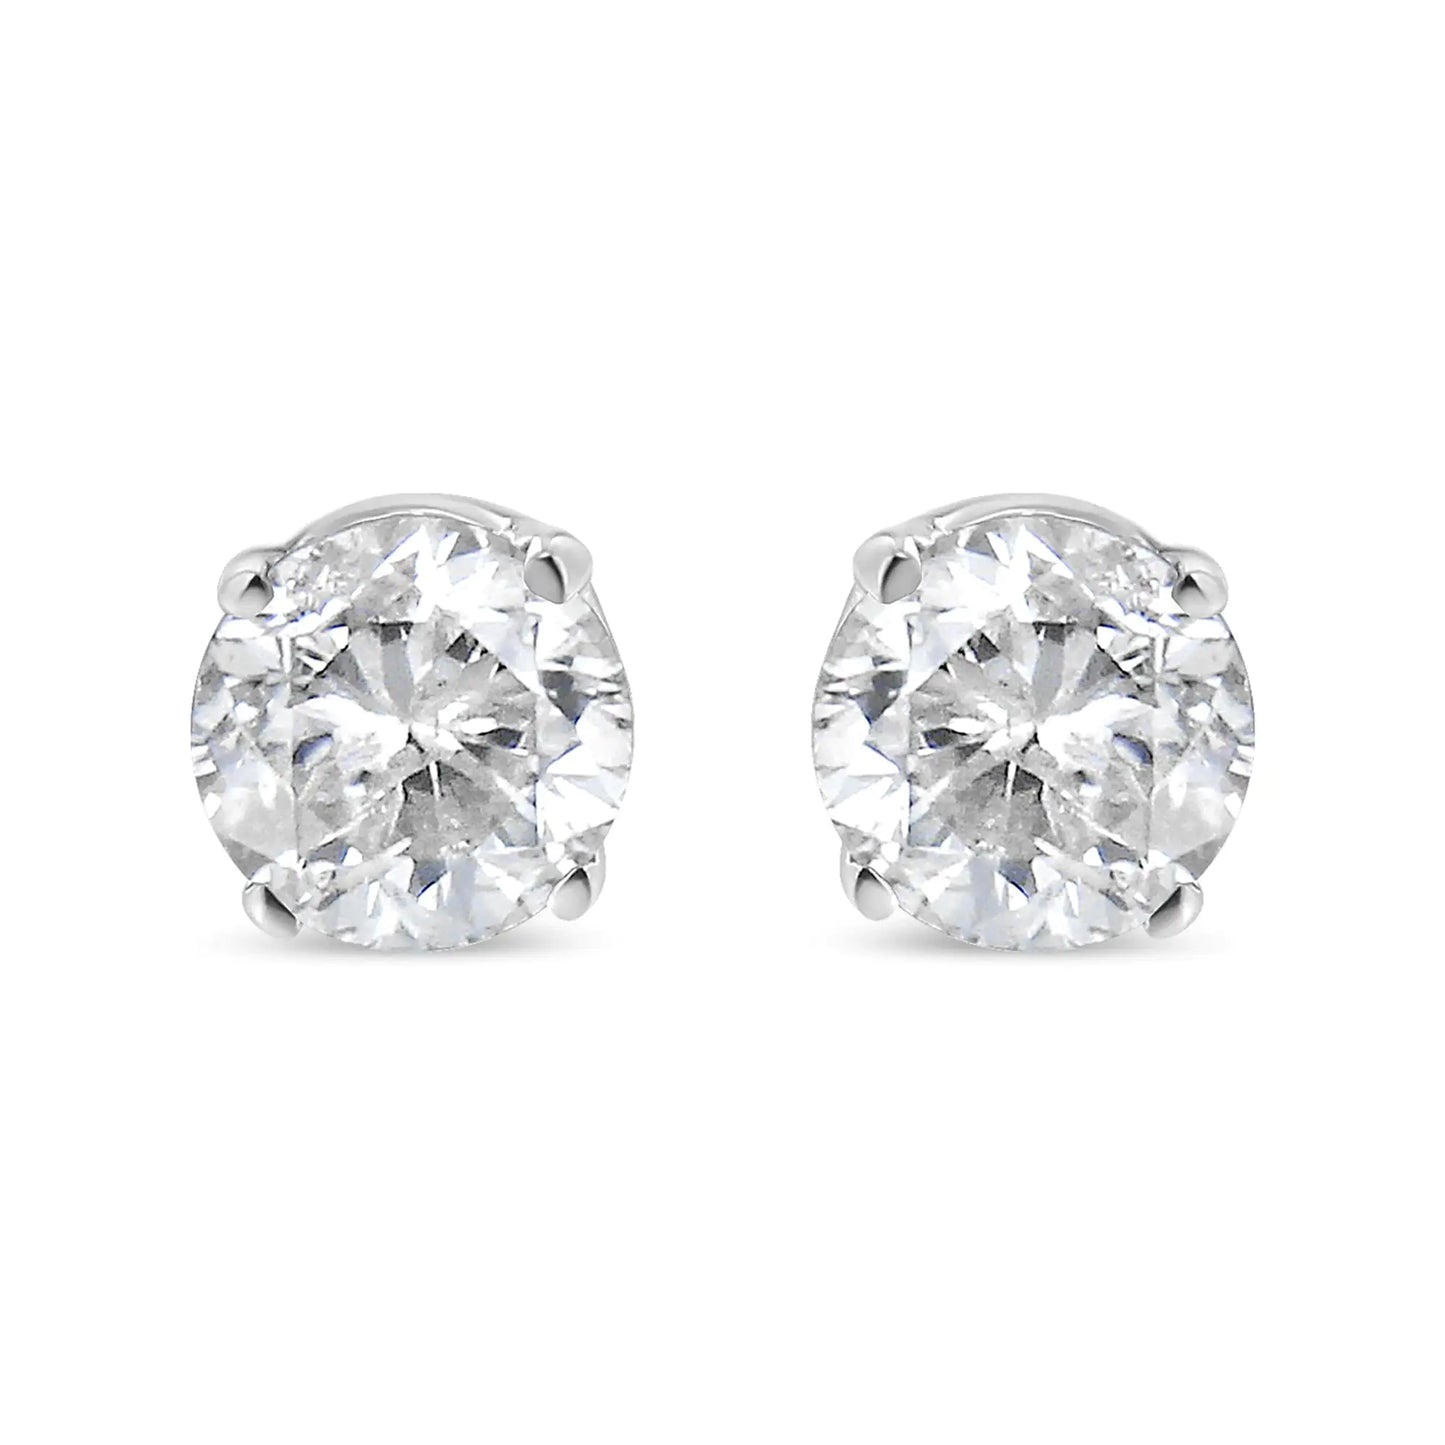 14K White Gold 1/6 Cttw Round Brilliant-Cut Near Colorless Diamond Classic 4-Prong Stud Earrings (H-I Color, I1-I2 Clarity)